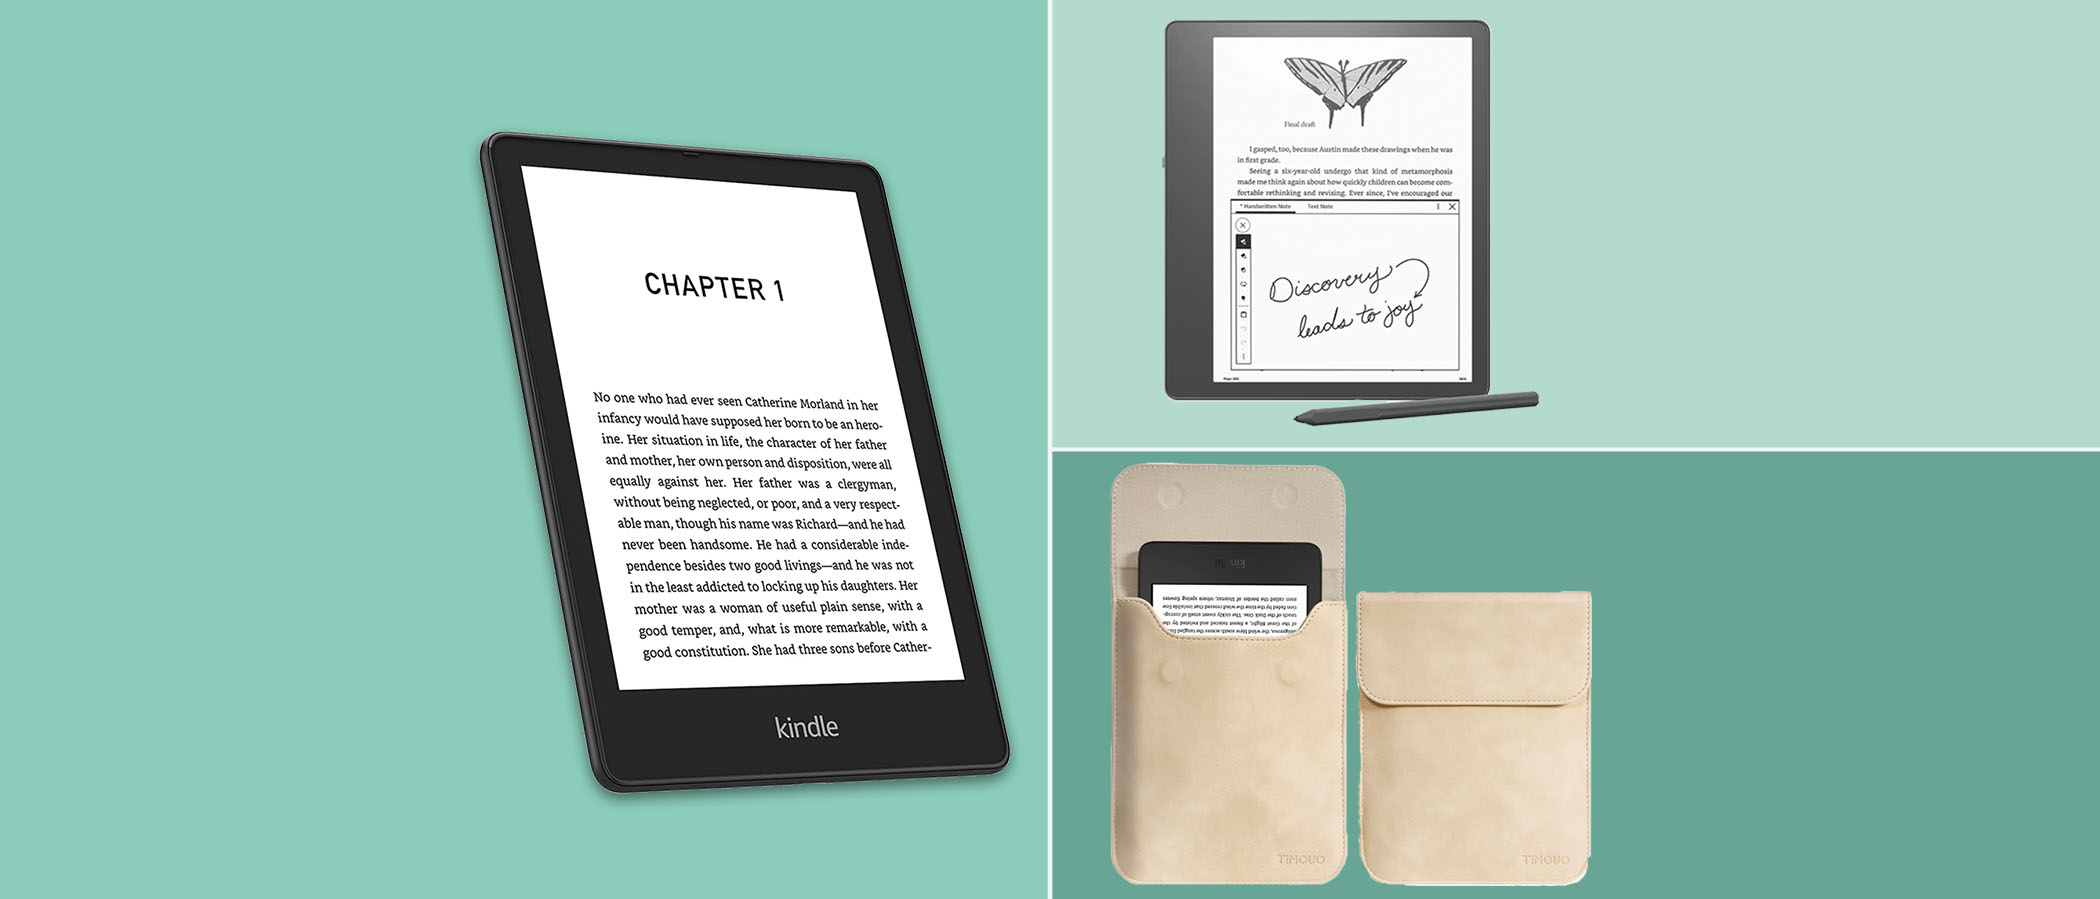 Best Kindle 2022: Paperwhite, Oasis and more  e-readers reviewed